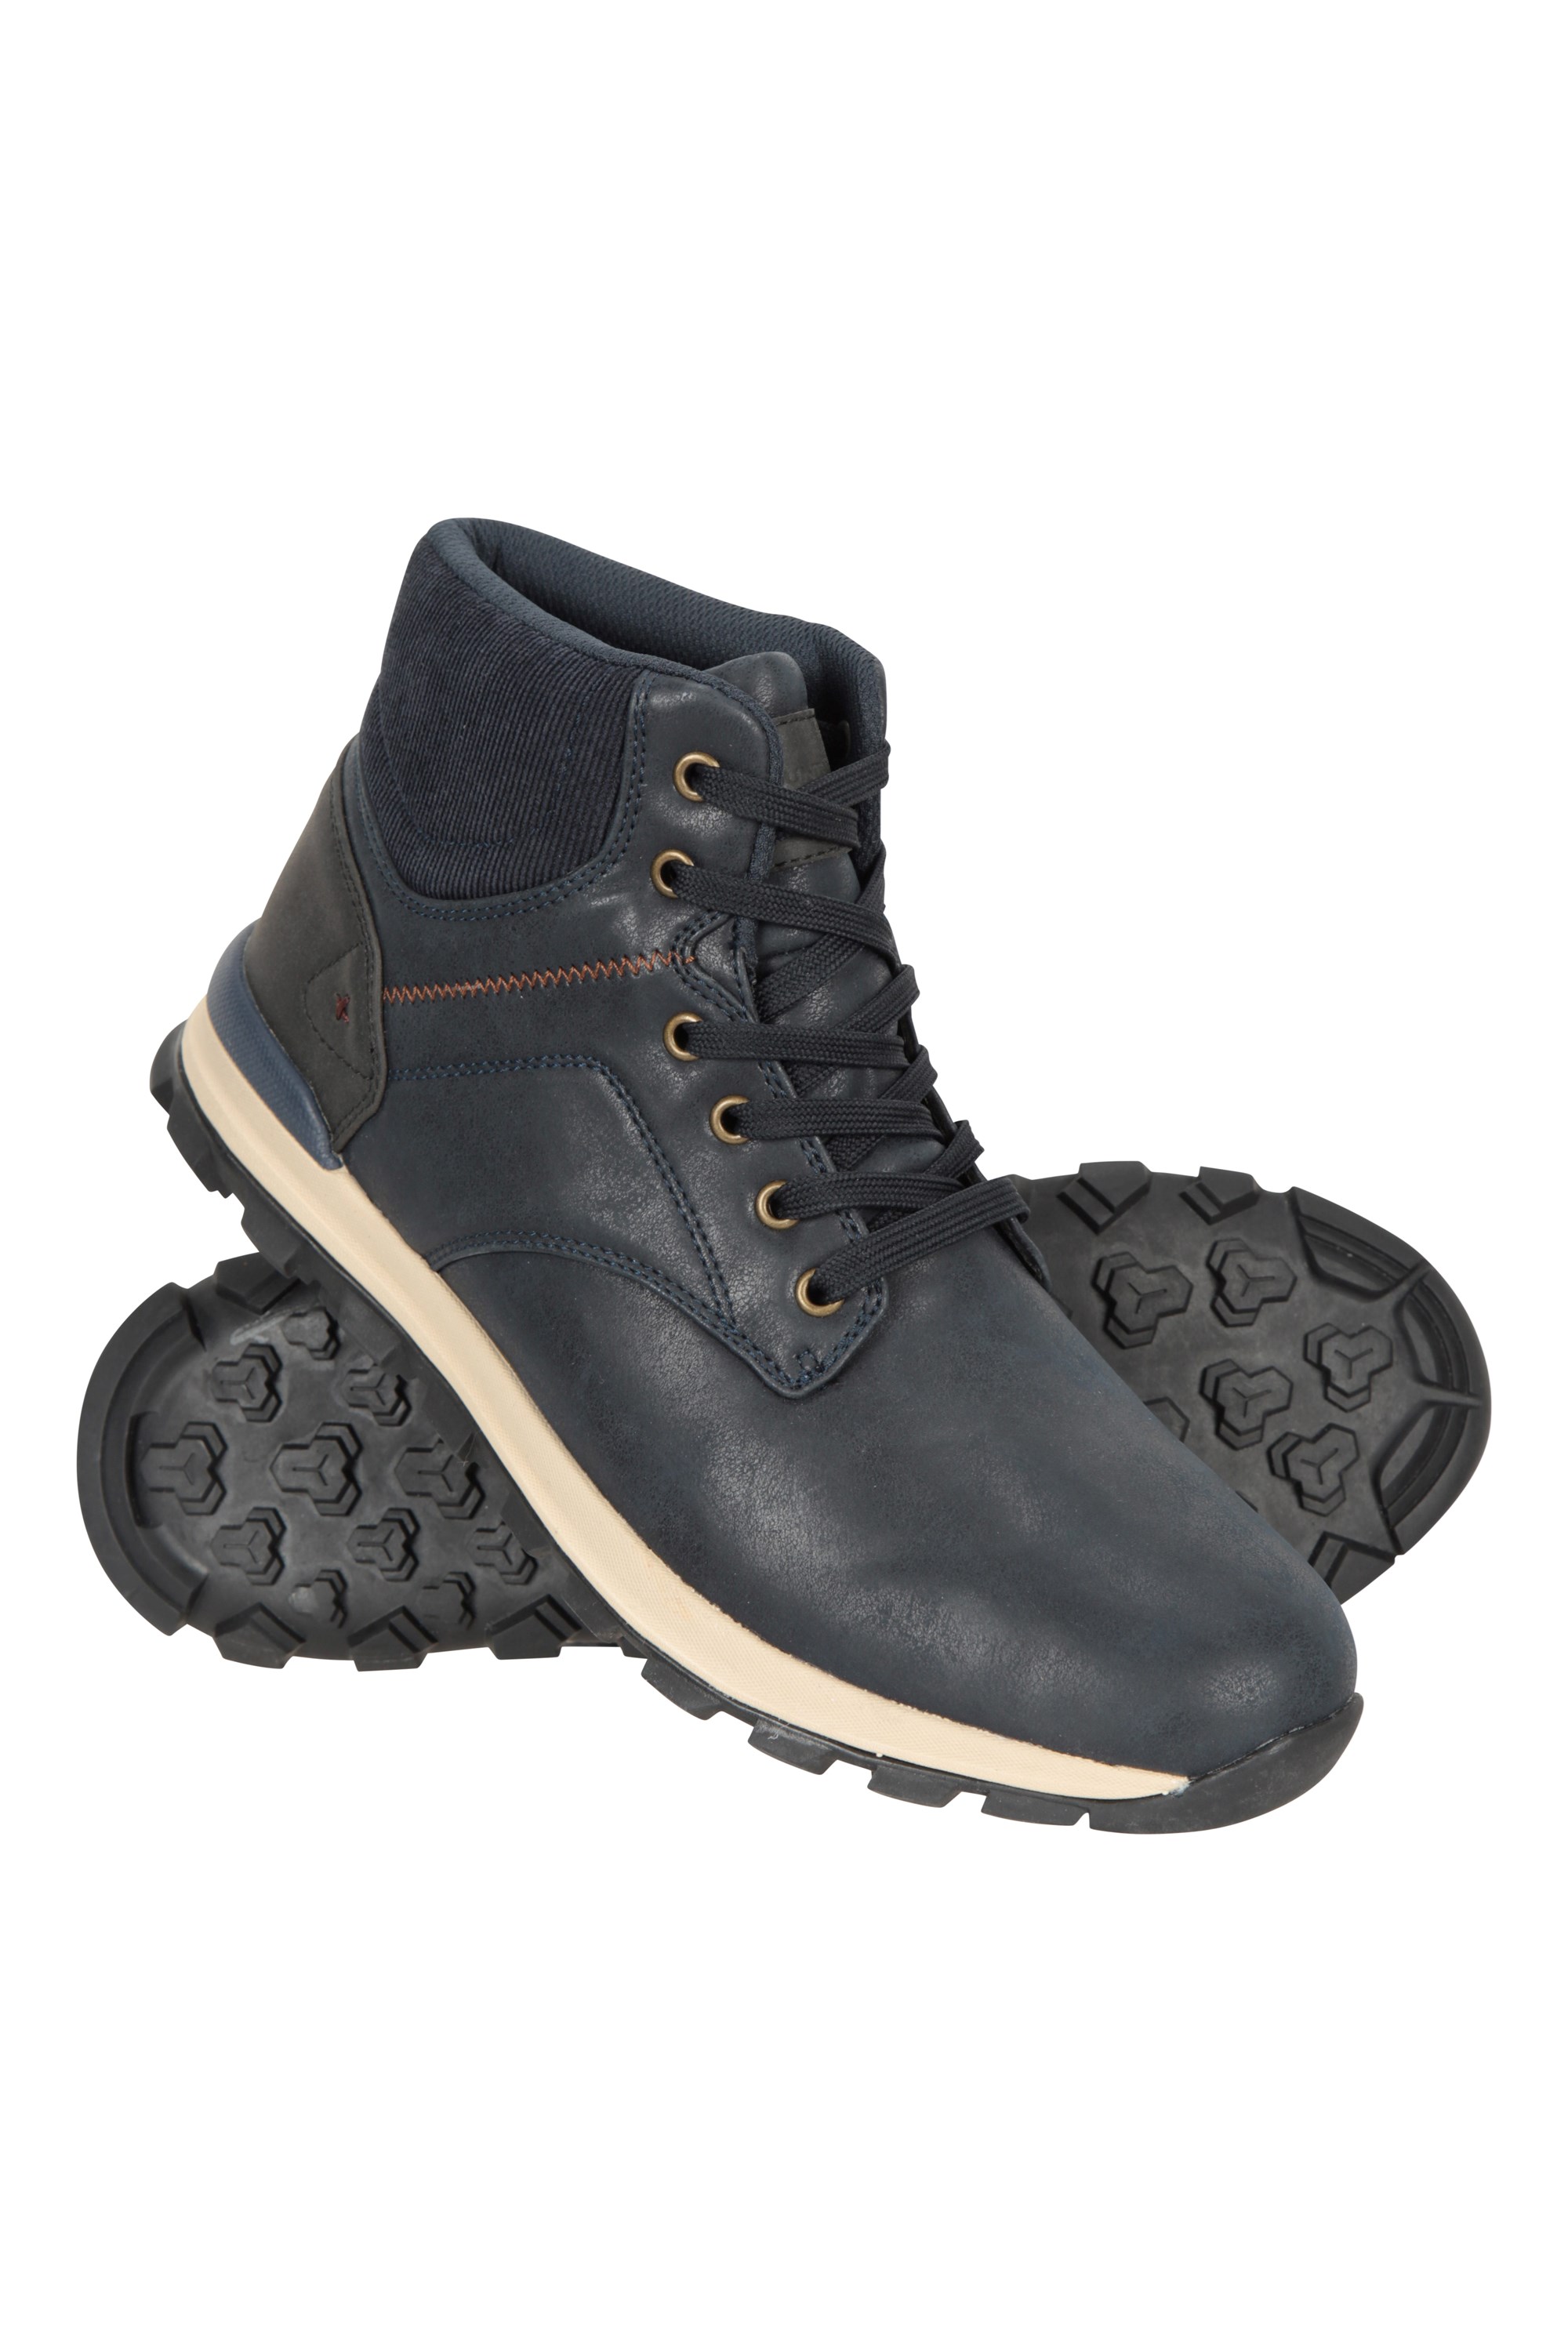 for Men Mens Shoes Boots Formal and smart boots Black Mountain Warehouse Mesh Upper & in Charcoal 